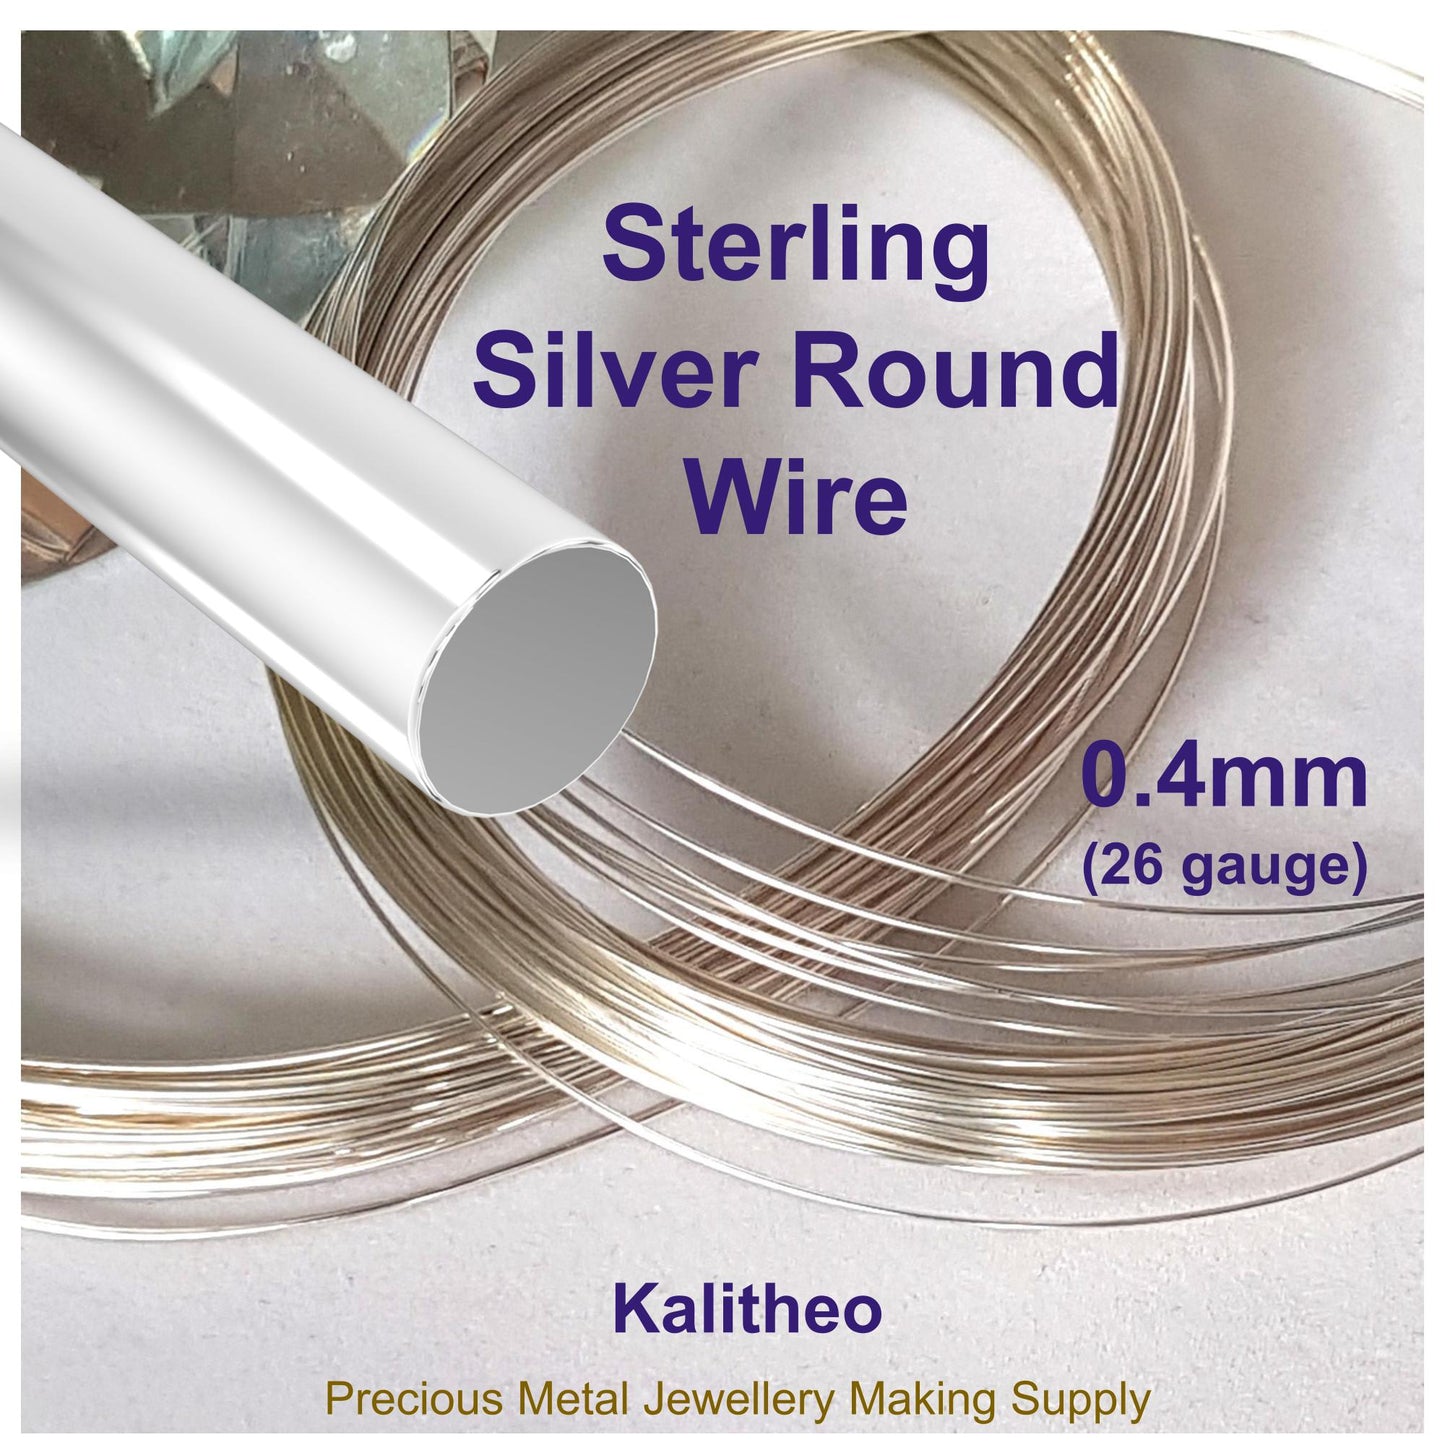 FAB Metals - 0.4mm Round Sterling Silver Wire ( 26 gauge) | Jewellery Making Supply